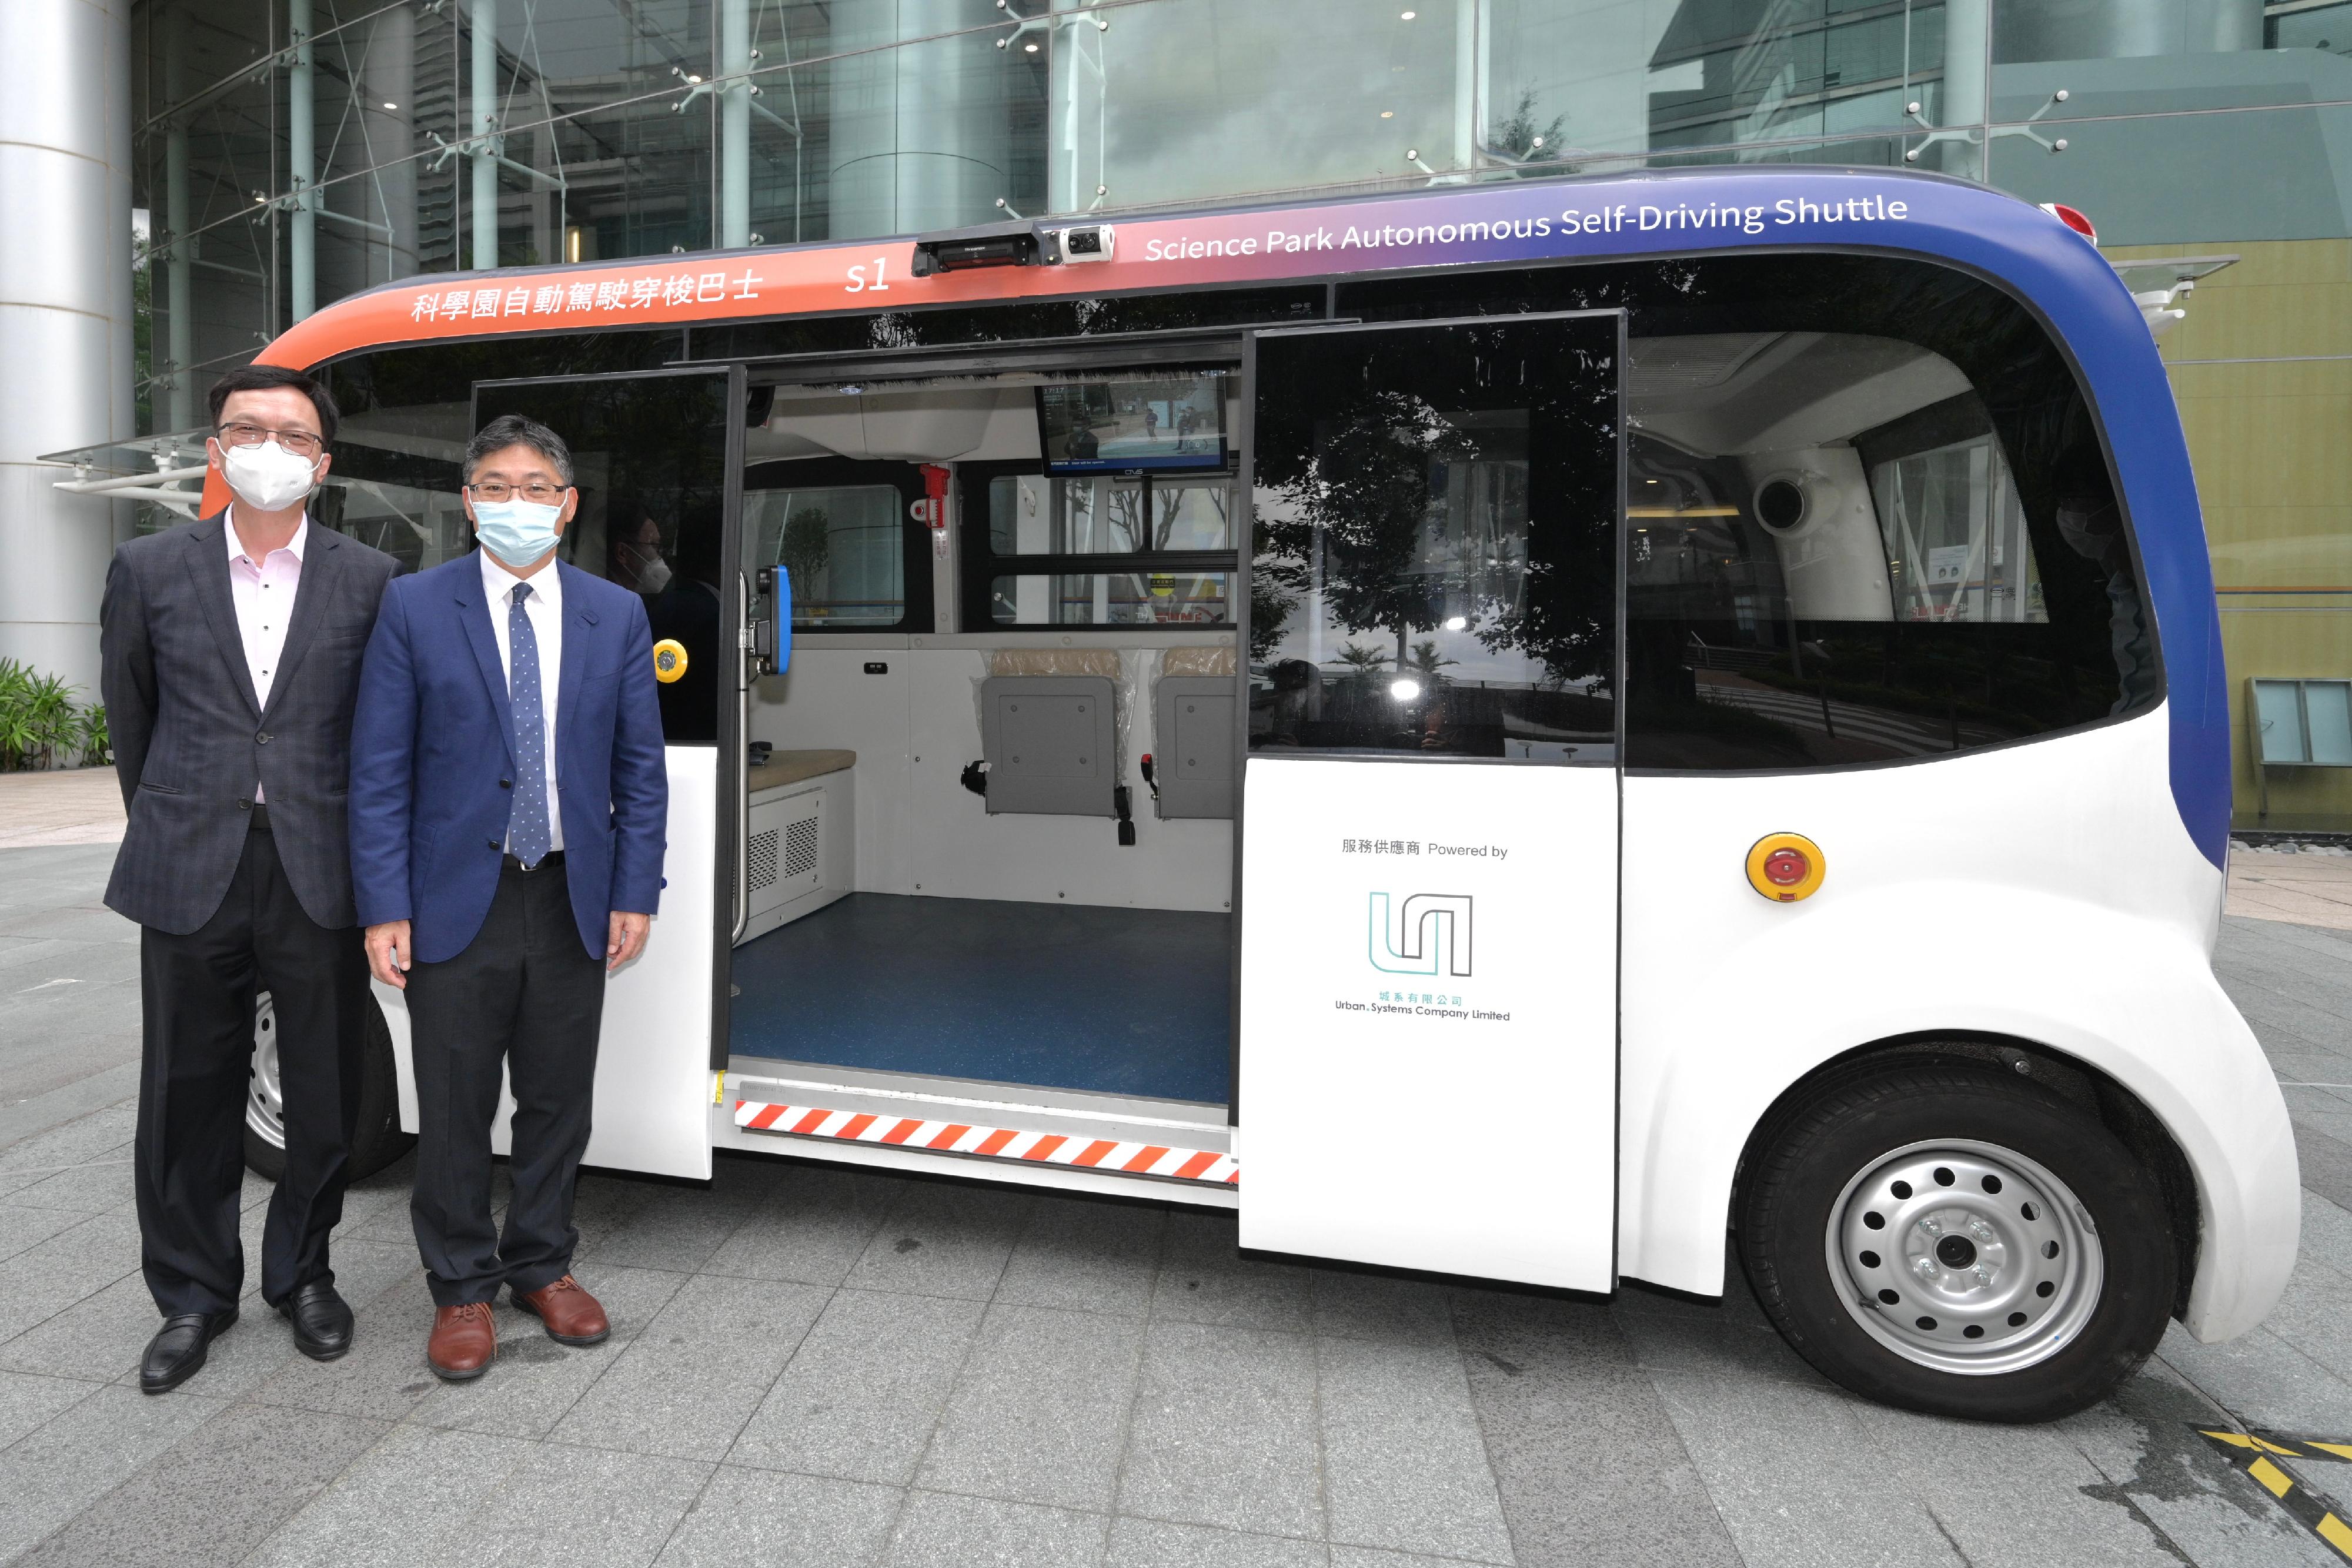 The Secretary for Transport and Logistics, Mr Lam Sai-hung (right), and the Under Secretary for Transport and Logistics, Mr Liu Chun-san (left), took a ride on an autonomous vehicle at the Hong Kong Science Park today (August 24) to experience a drive using an autonomous driving system under certain conditions and environments, as well as the convenience brought about by high driving automation.